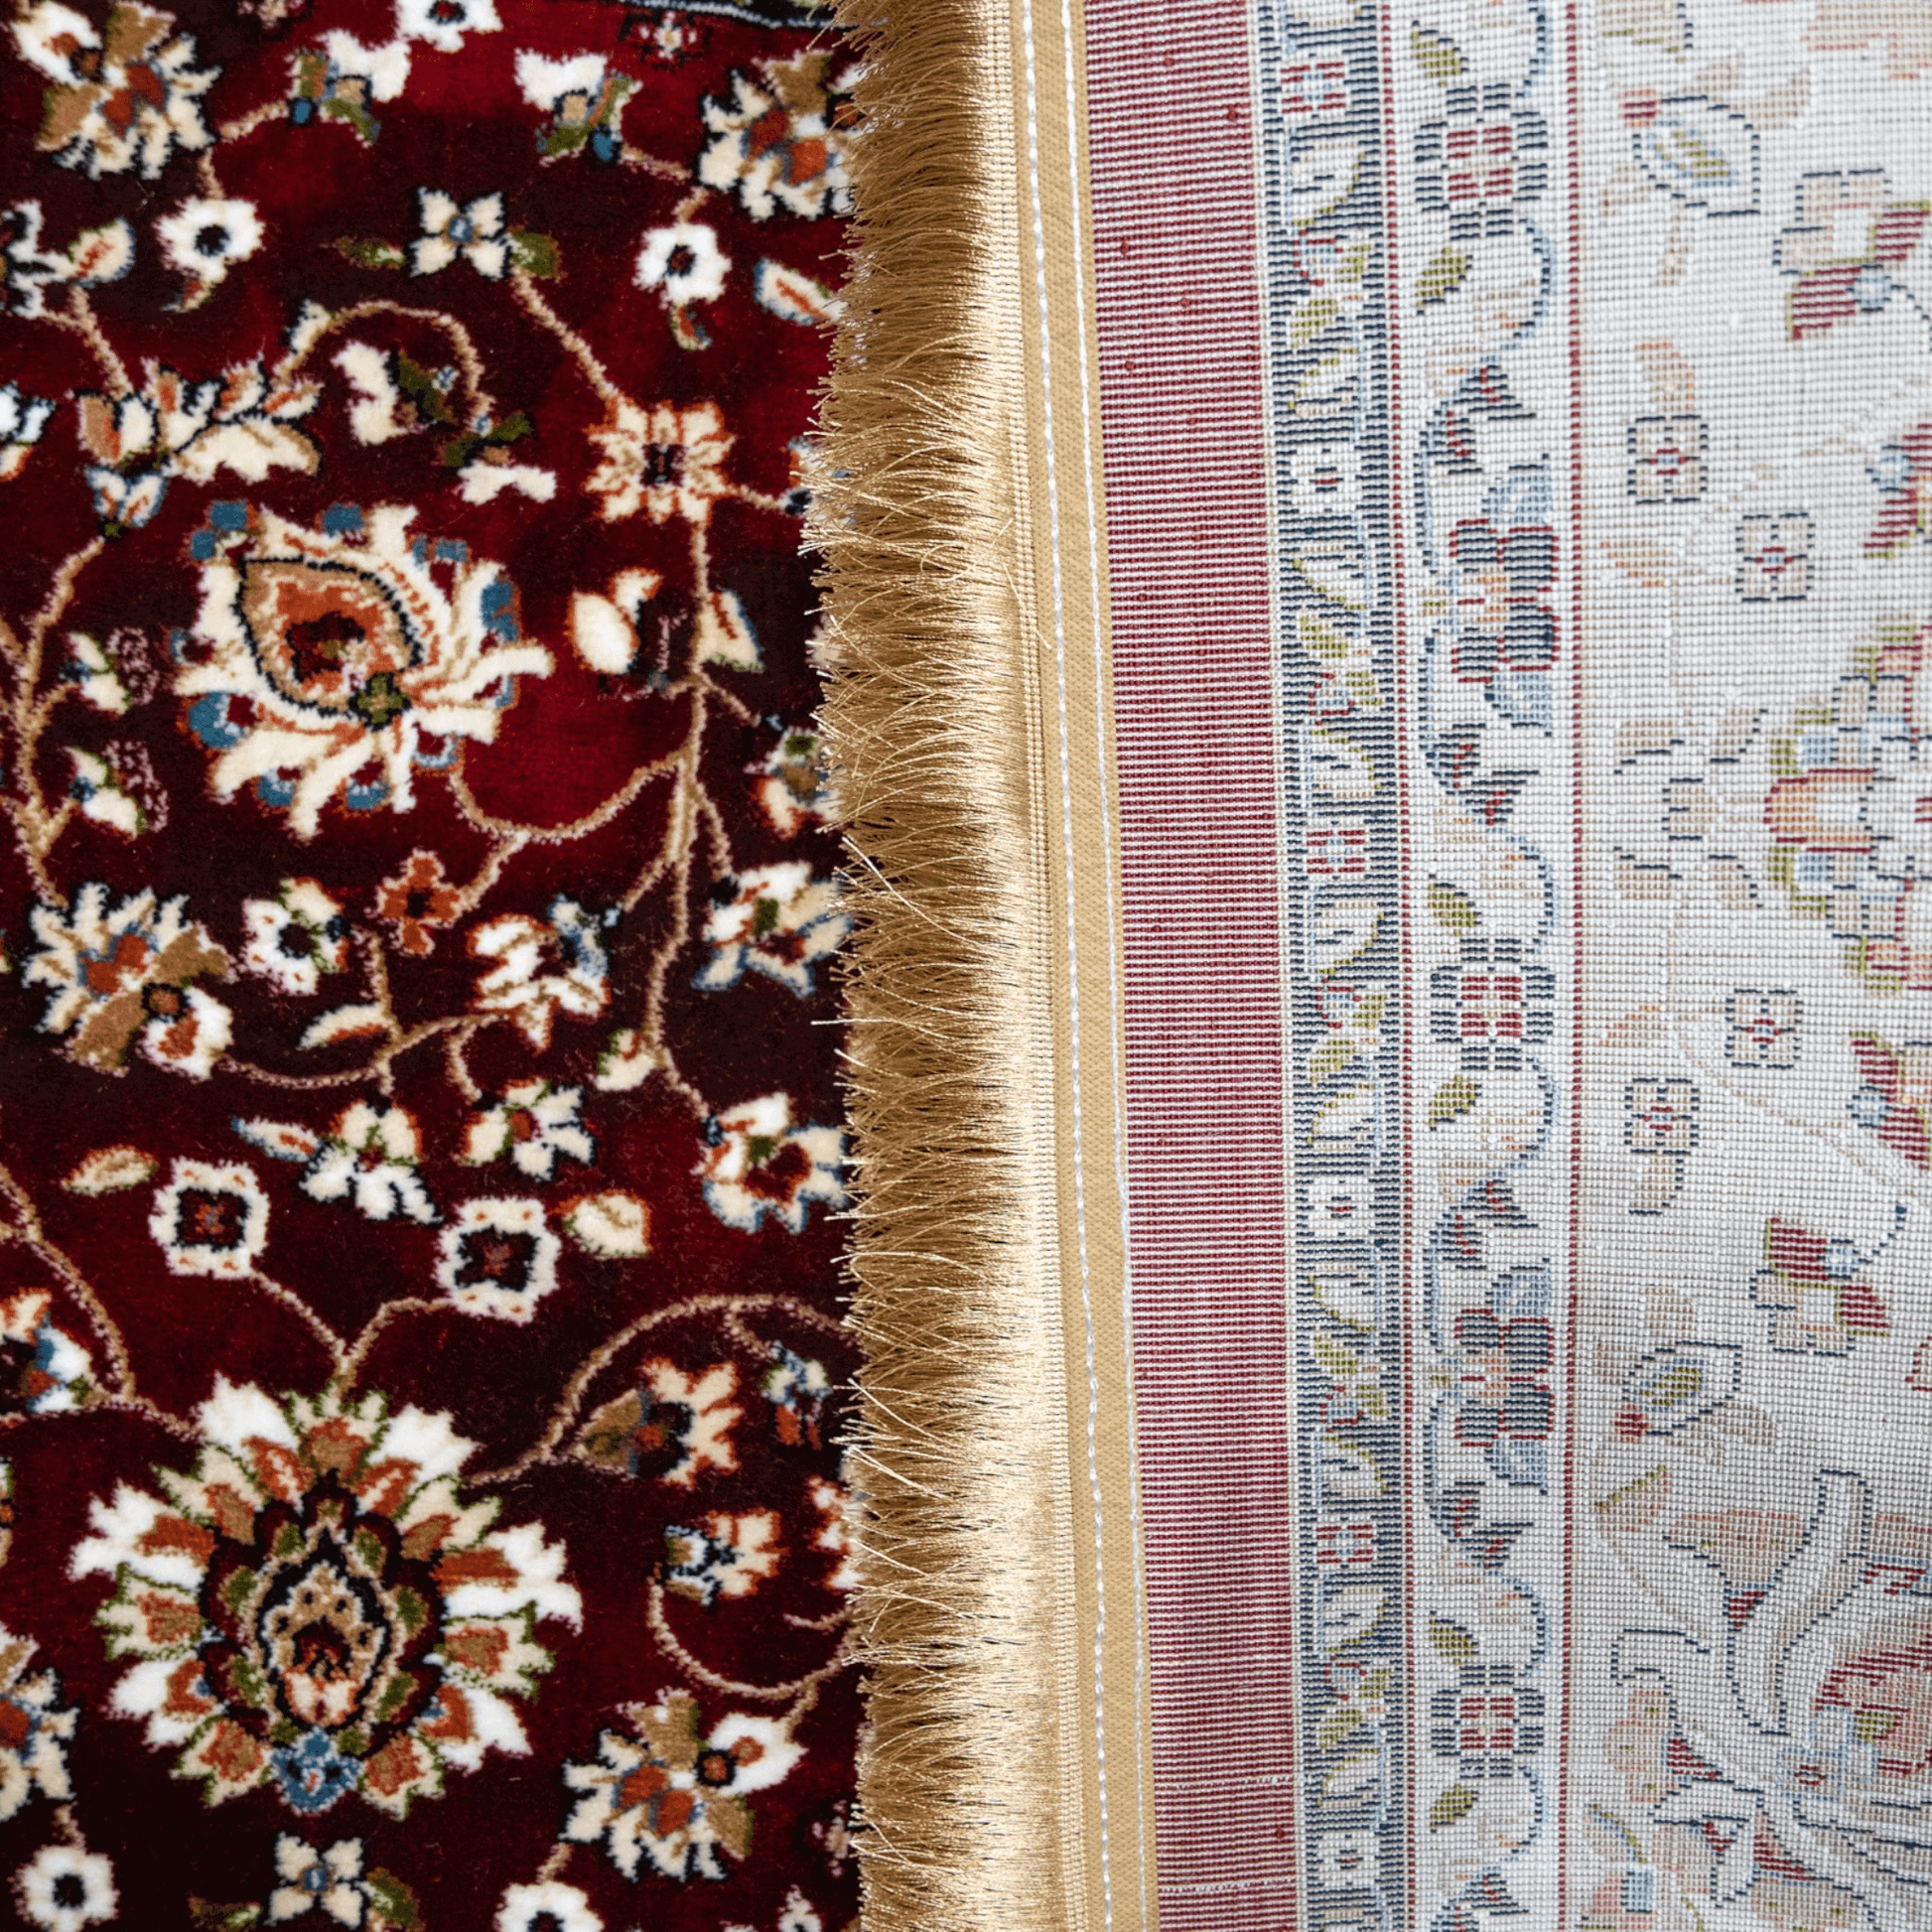 Classic Turkish Rugs. Made in Turkey, these affordable rugs bring authentic charm to any space. Soft and luxurious, blending tradition with modernity.